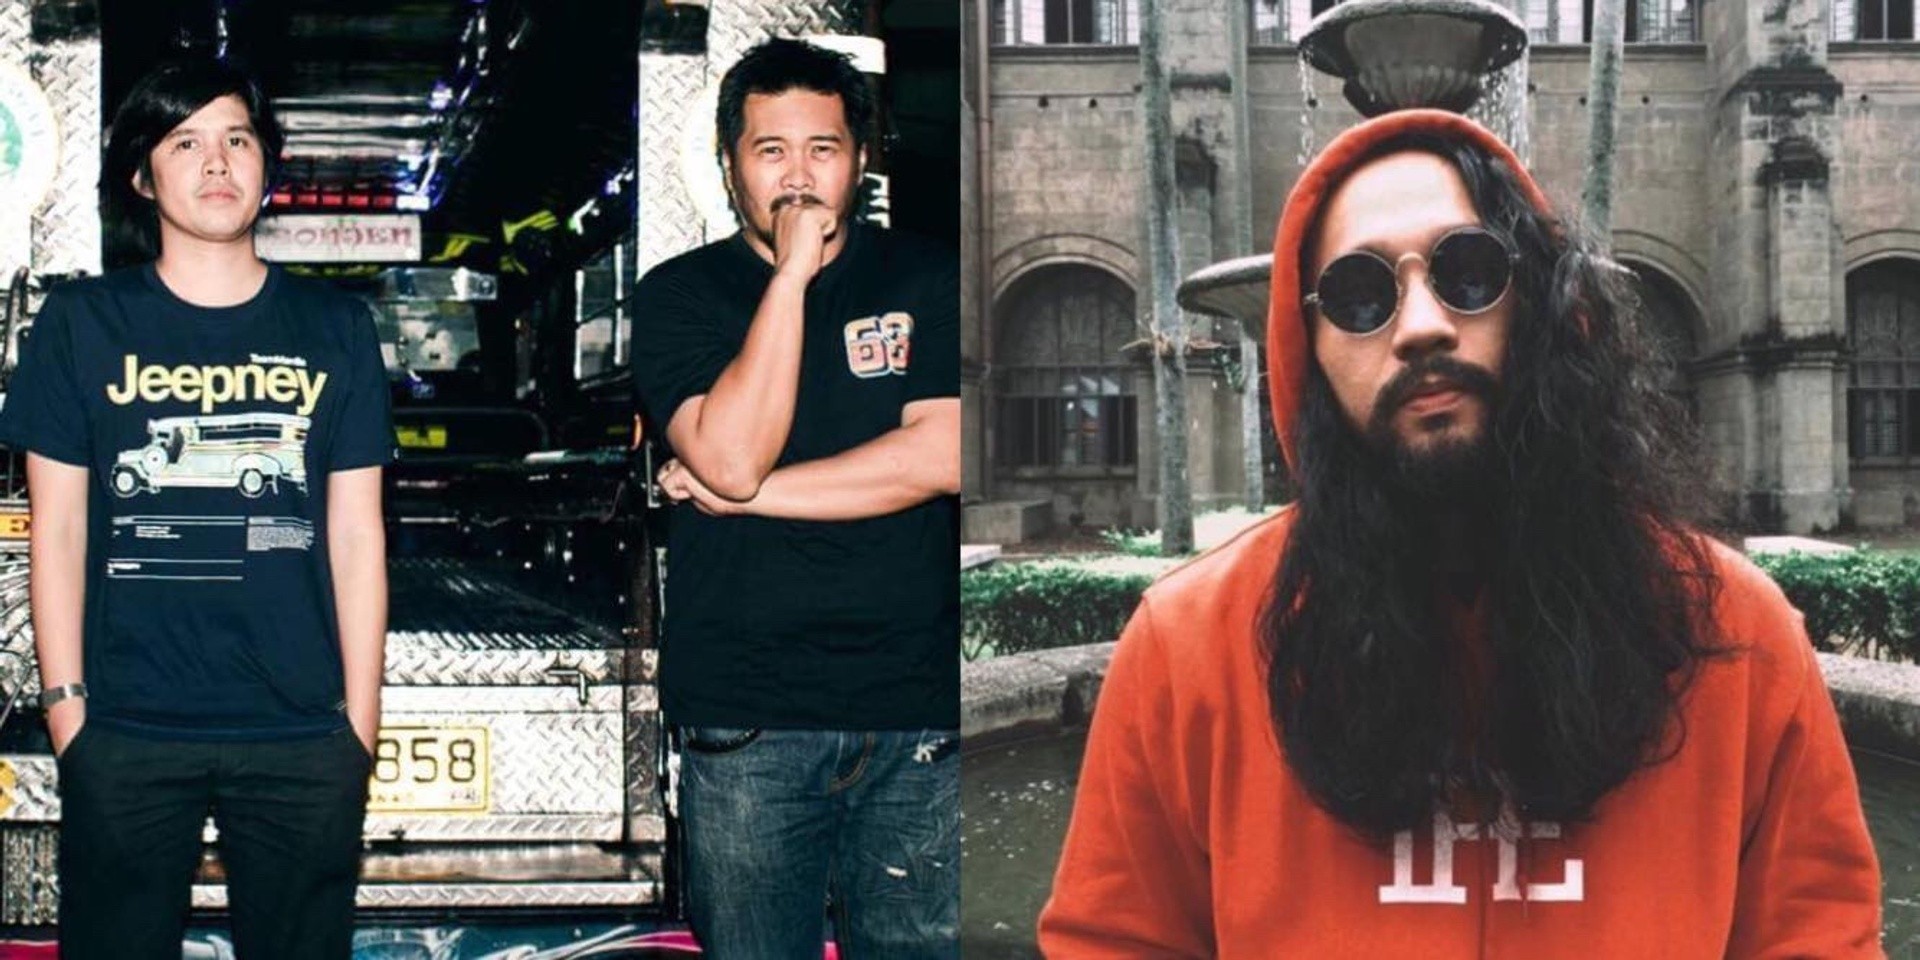 Tarsius share previously unreleased song with Switchtrik – listen